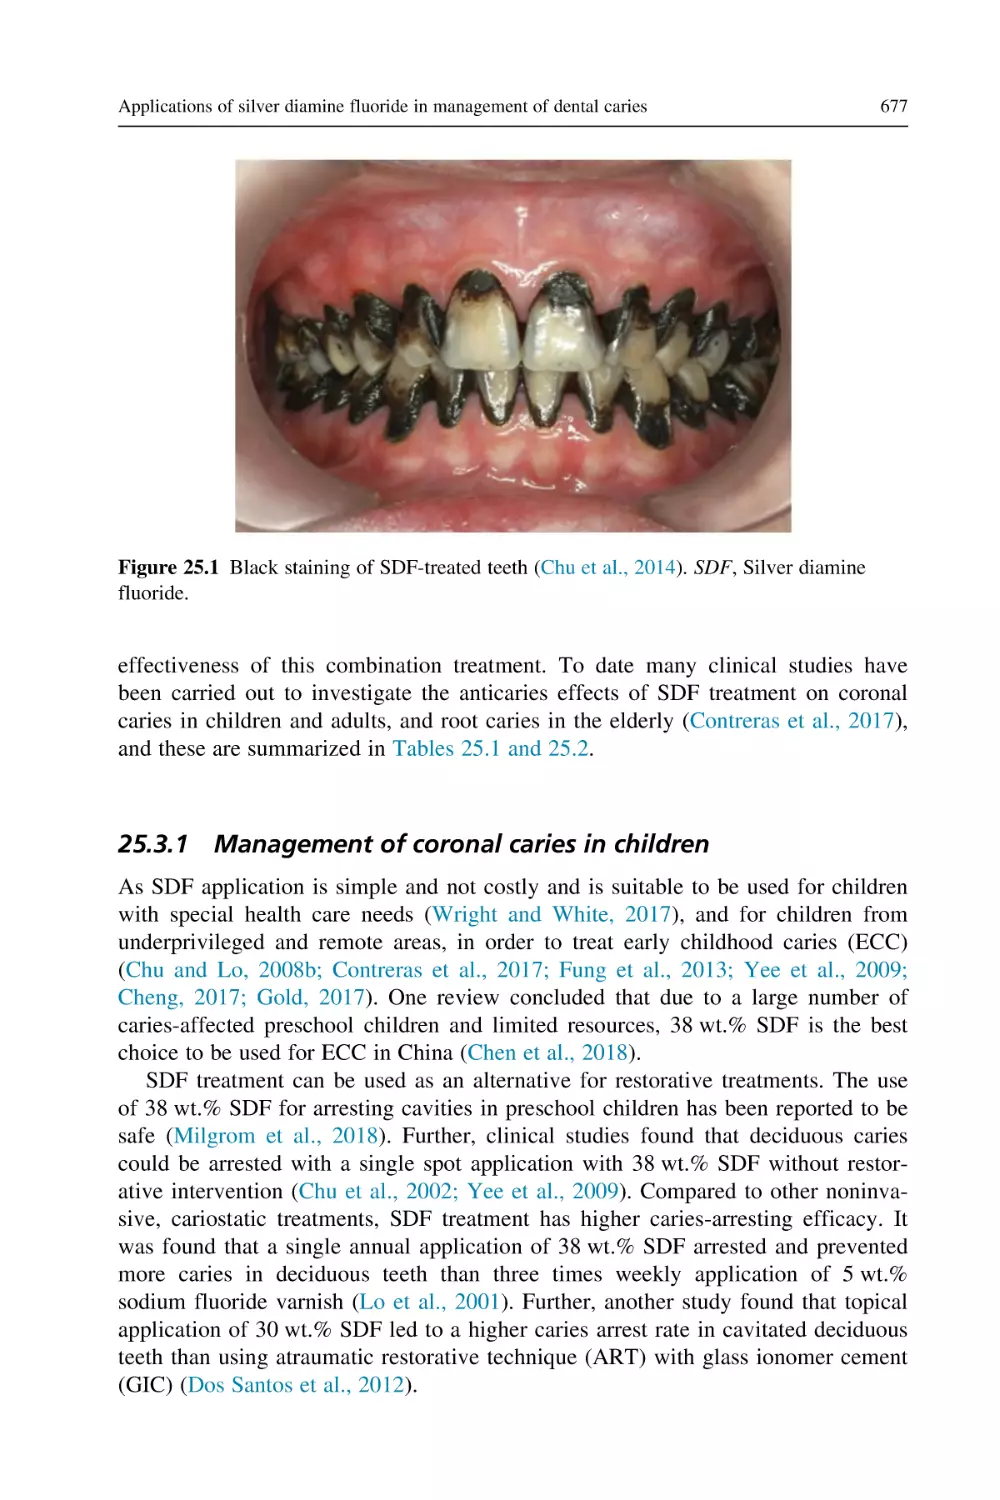 25.3.1 Management of coronal caries in children